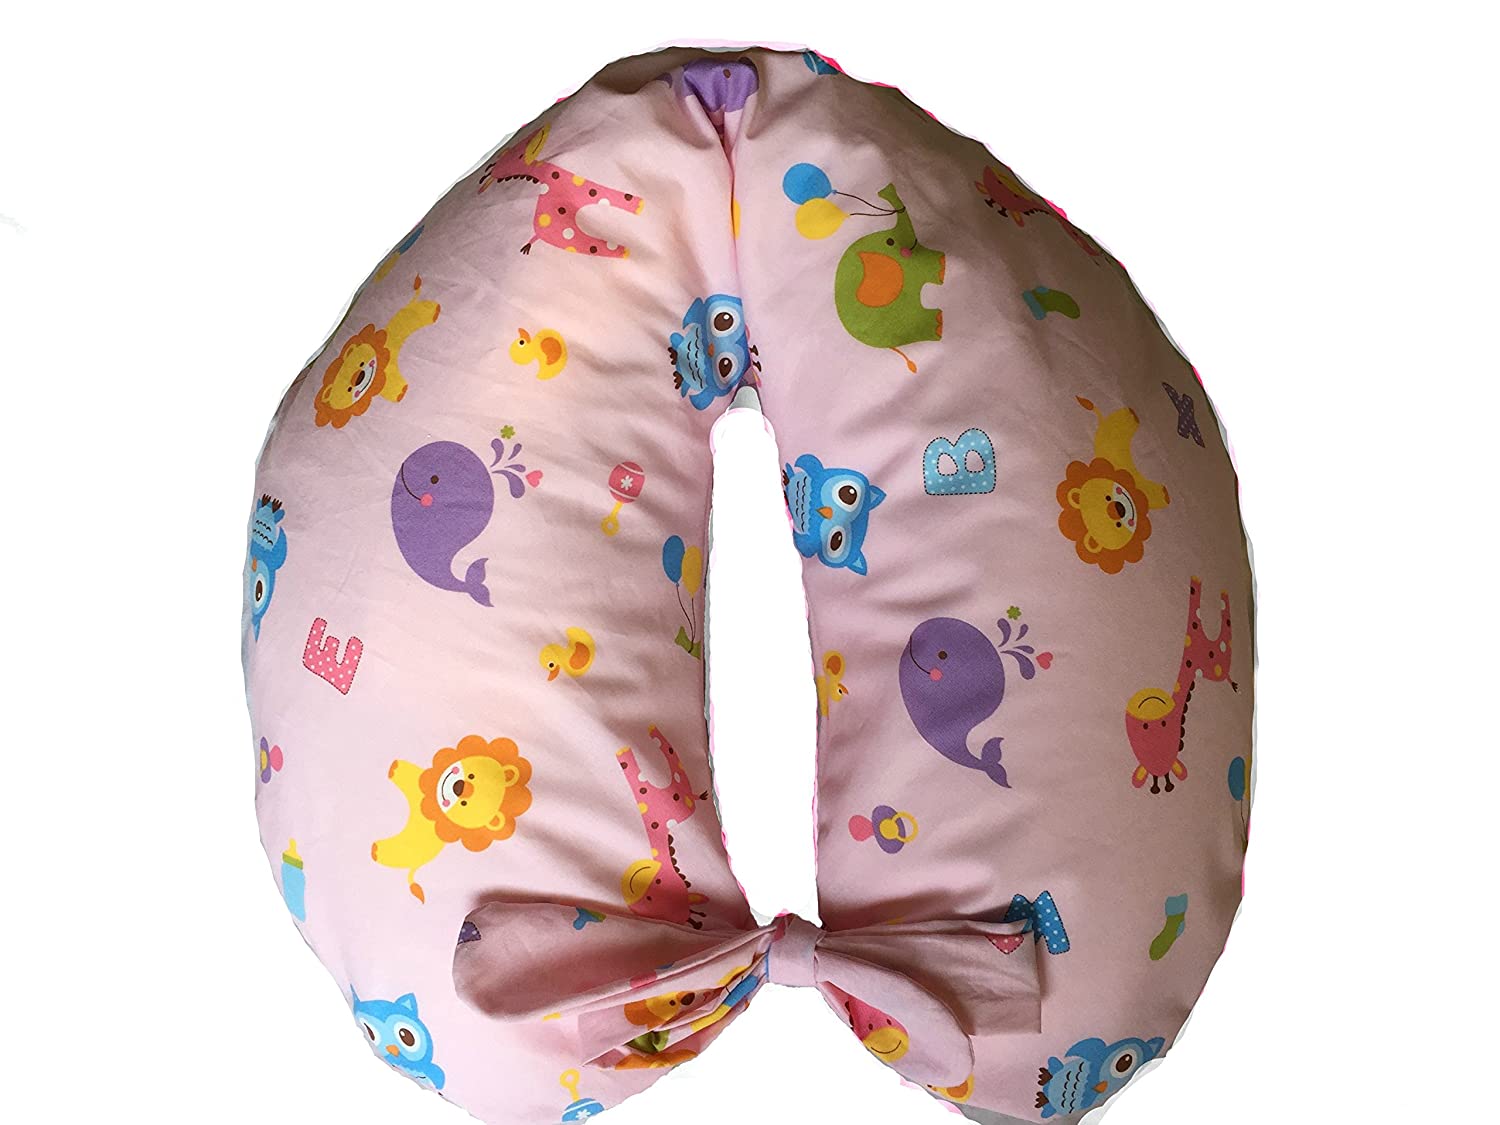 merrymama - Nursing pillow + lining with lacing/cm 130 (filled with polystyrene balls), zoo background pink